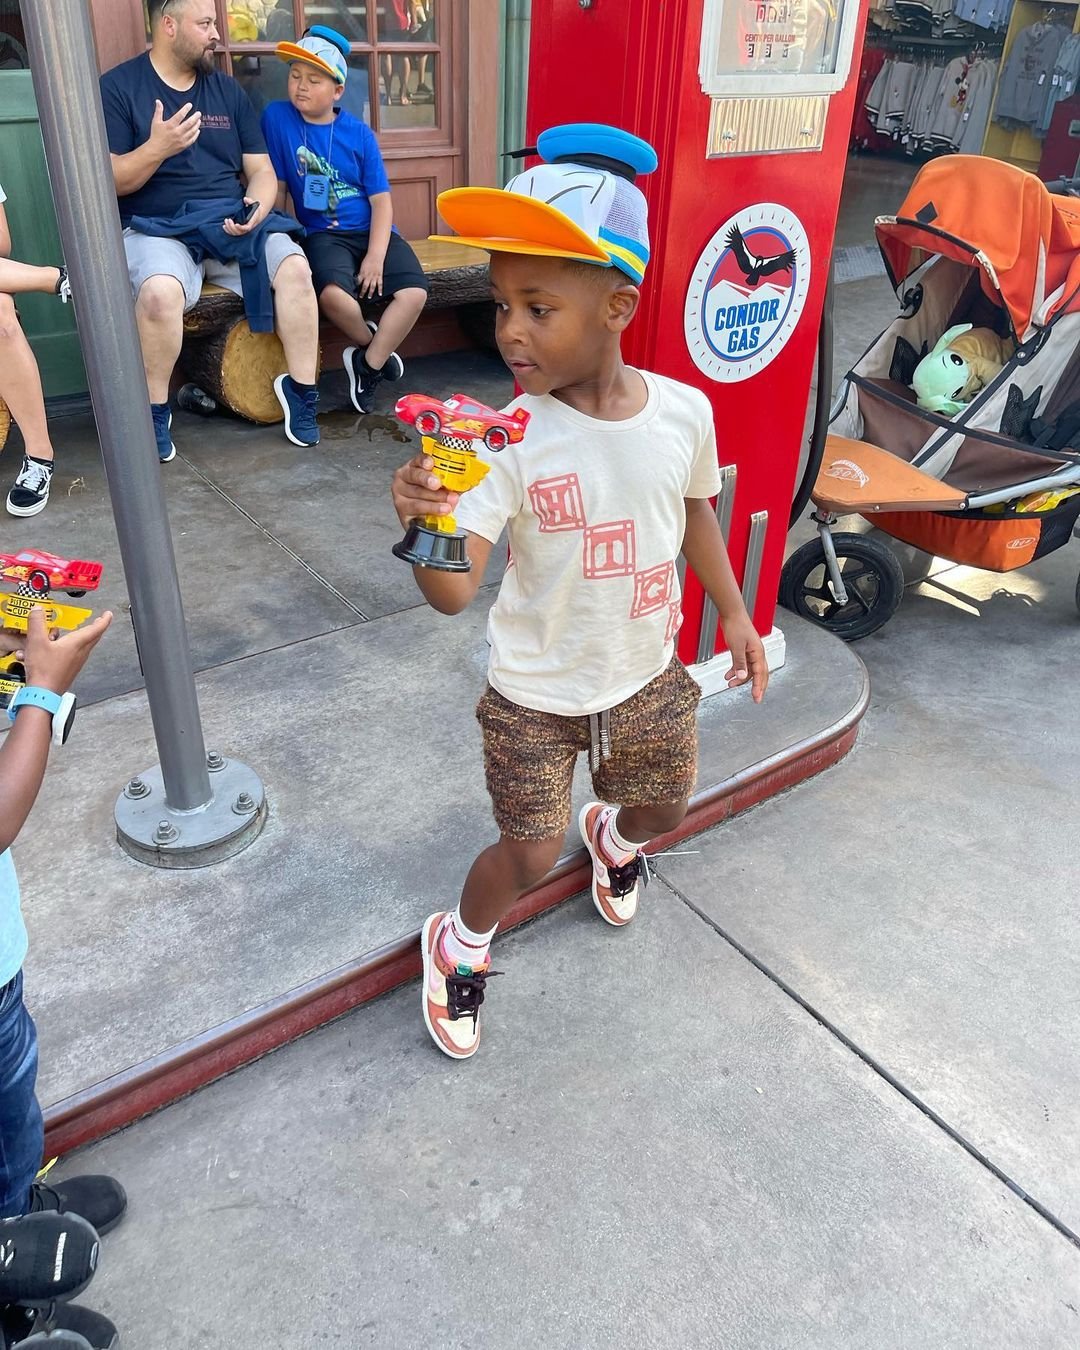 Russell Westbrook shares adorable photos from his son's 5th birthday party